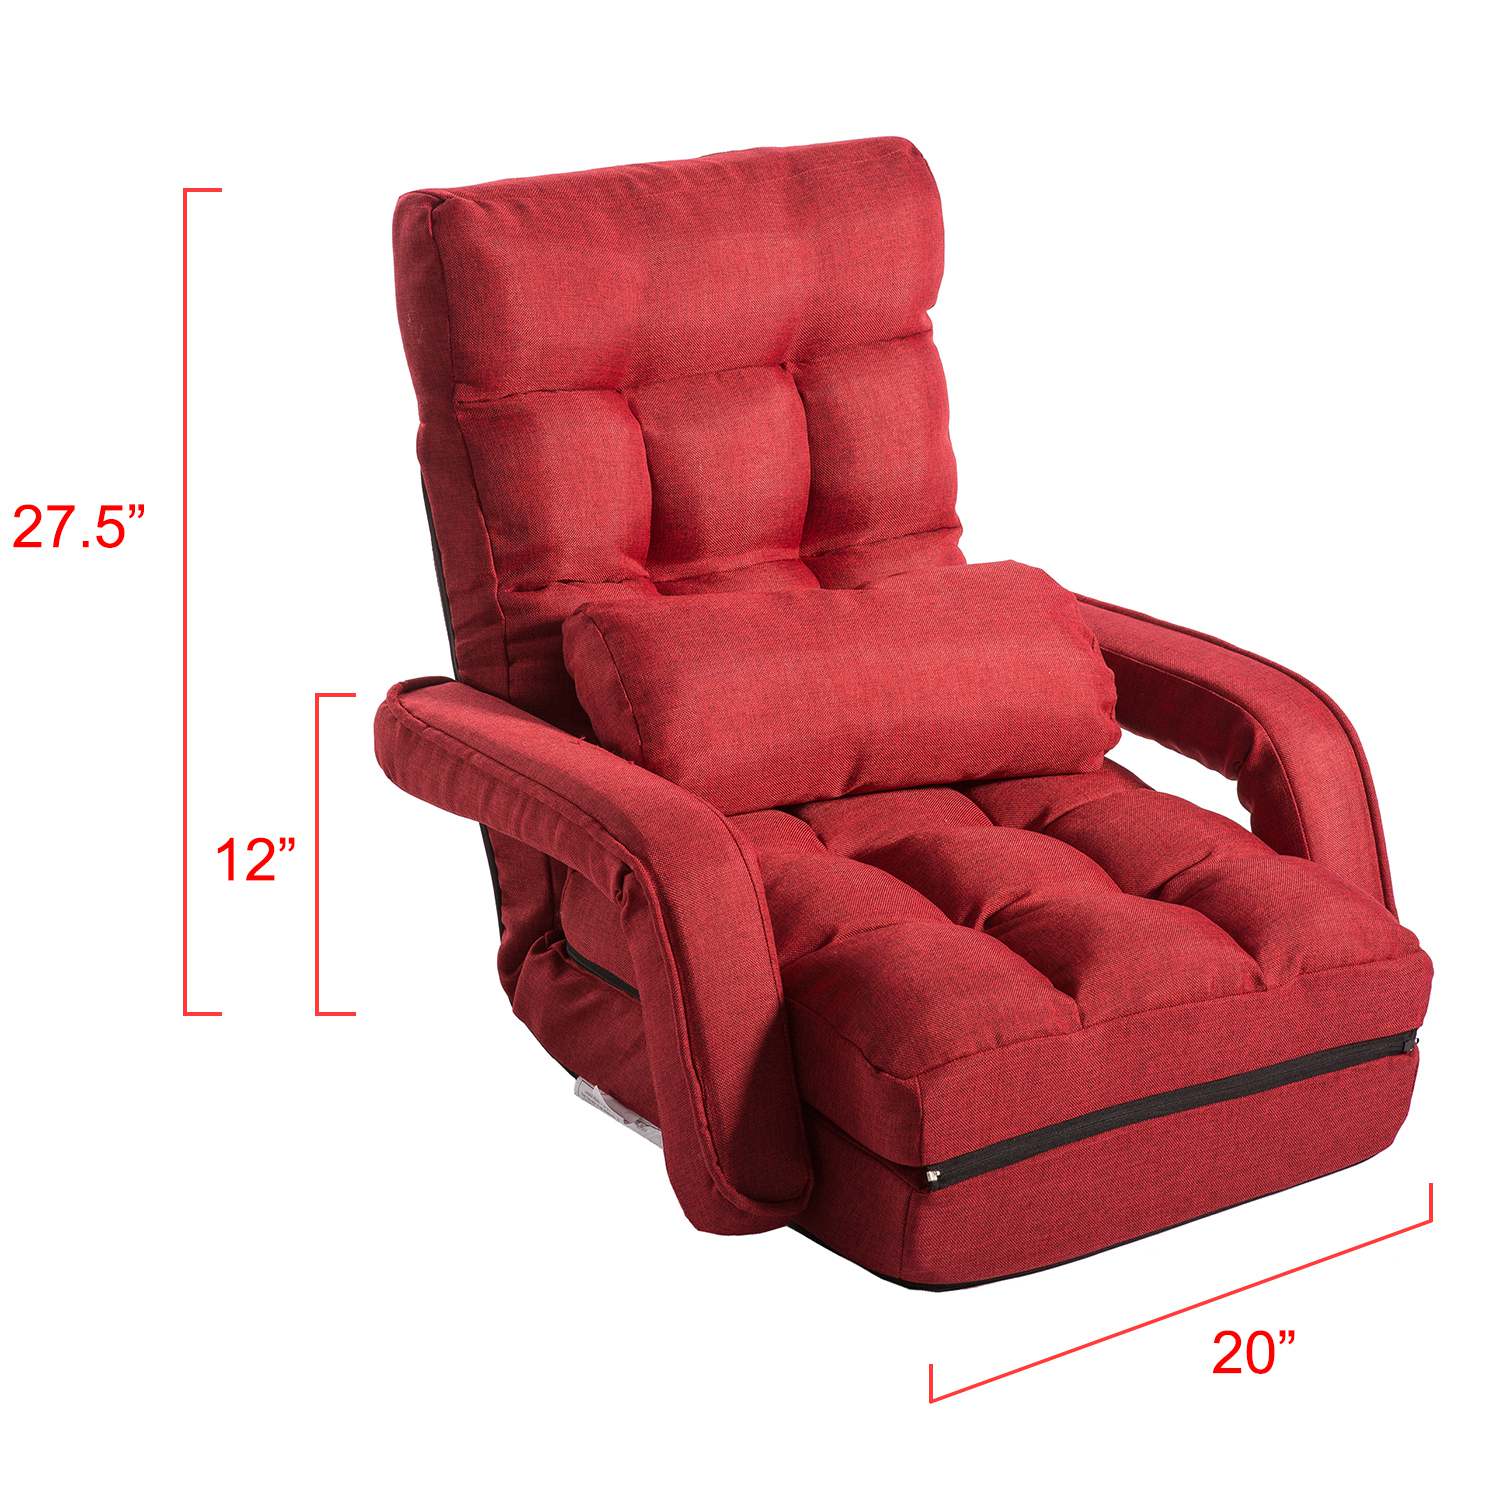 Folding Lazy Sofa Floor Chair For Small Space Lounger Bed Floor Chair Sofa With Armrests And A Pillow (8)